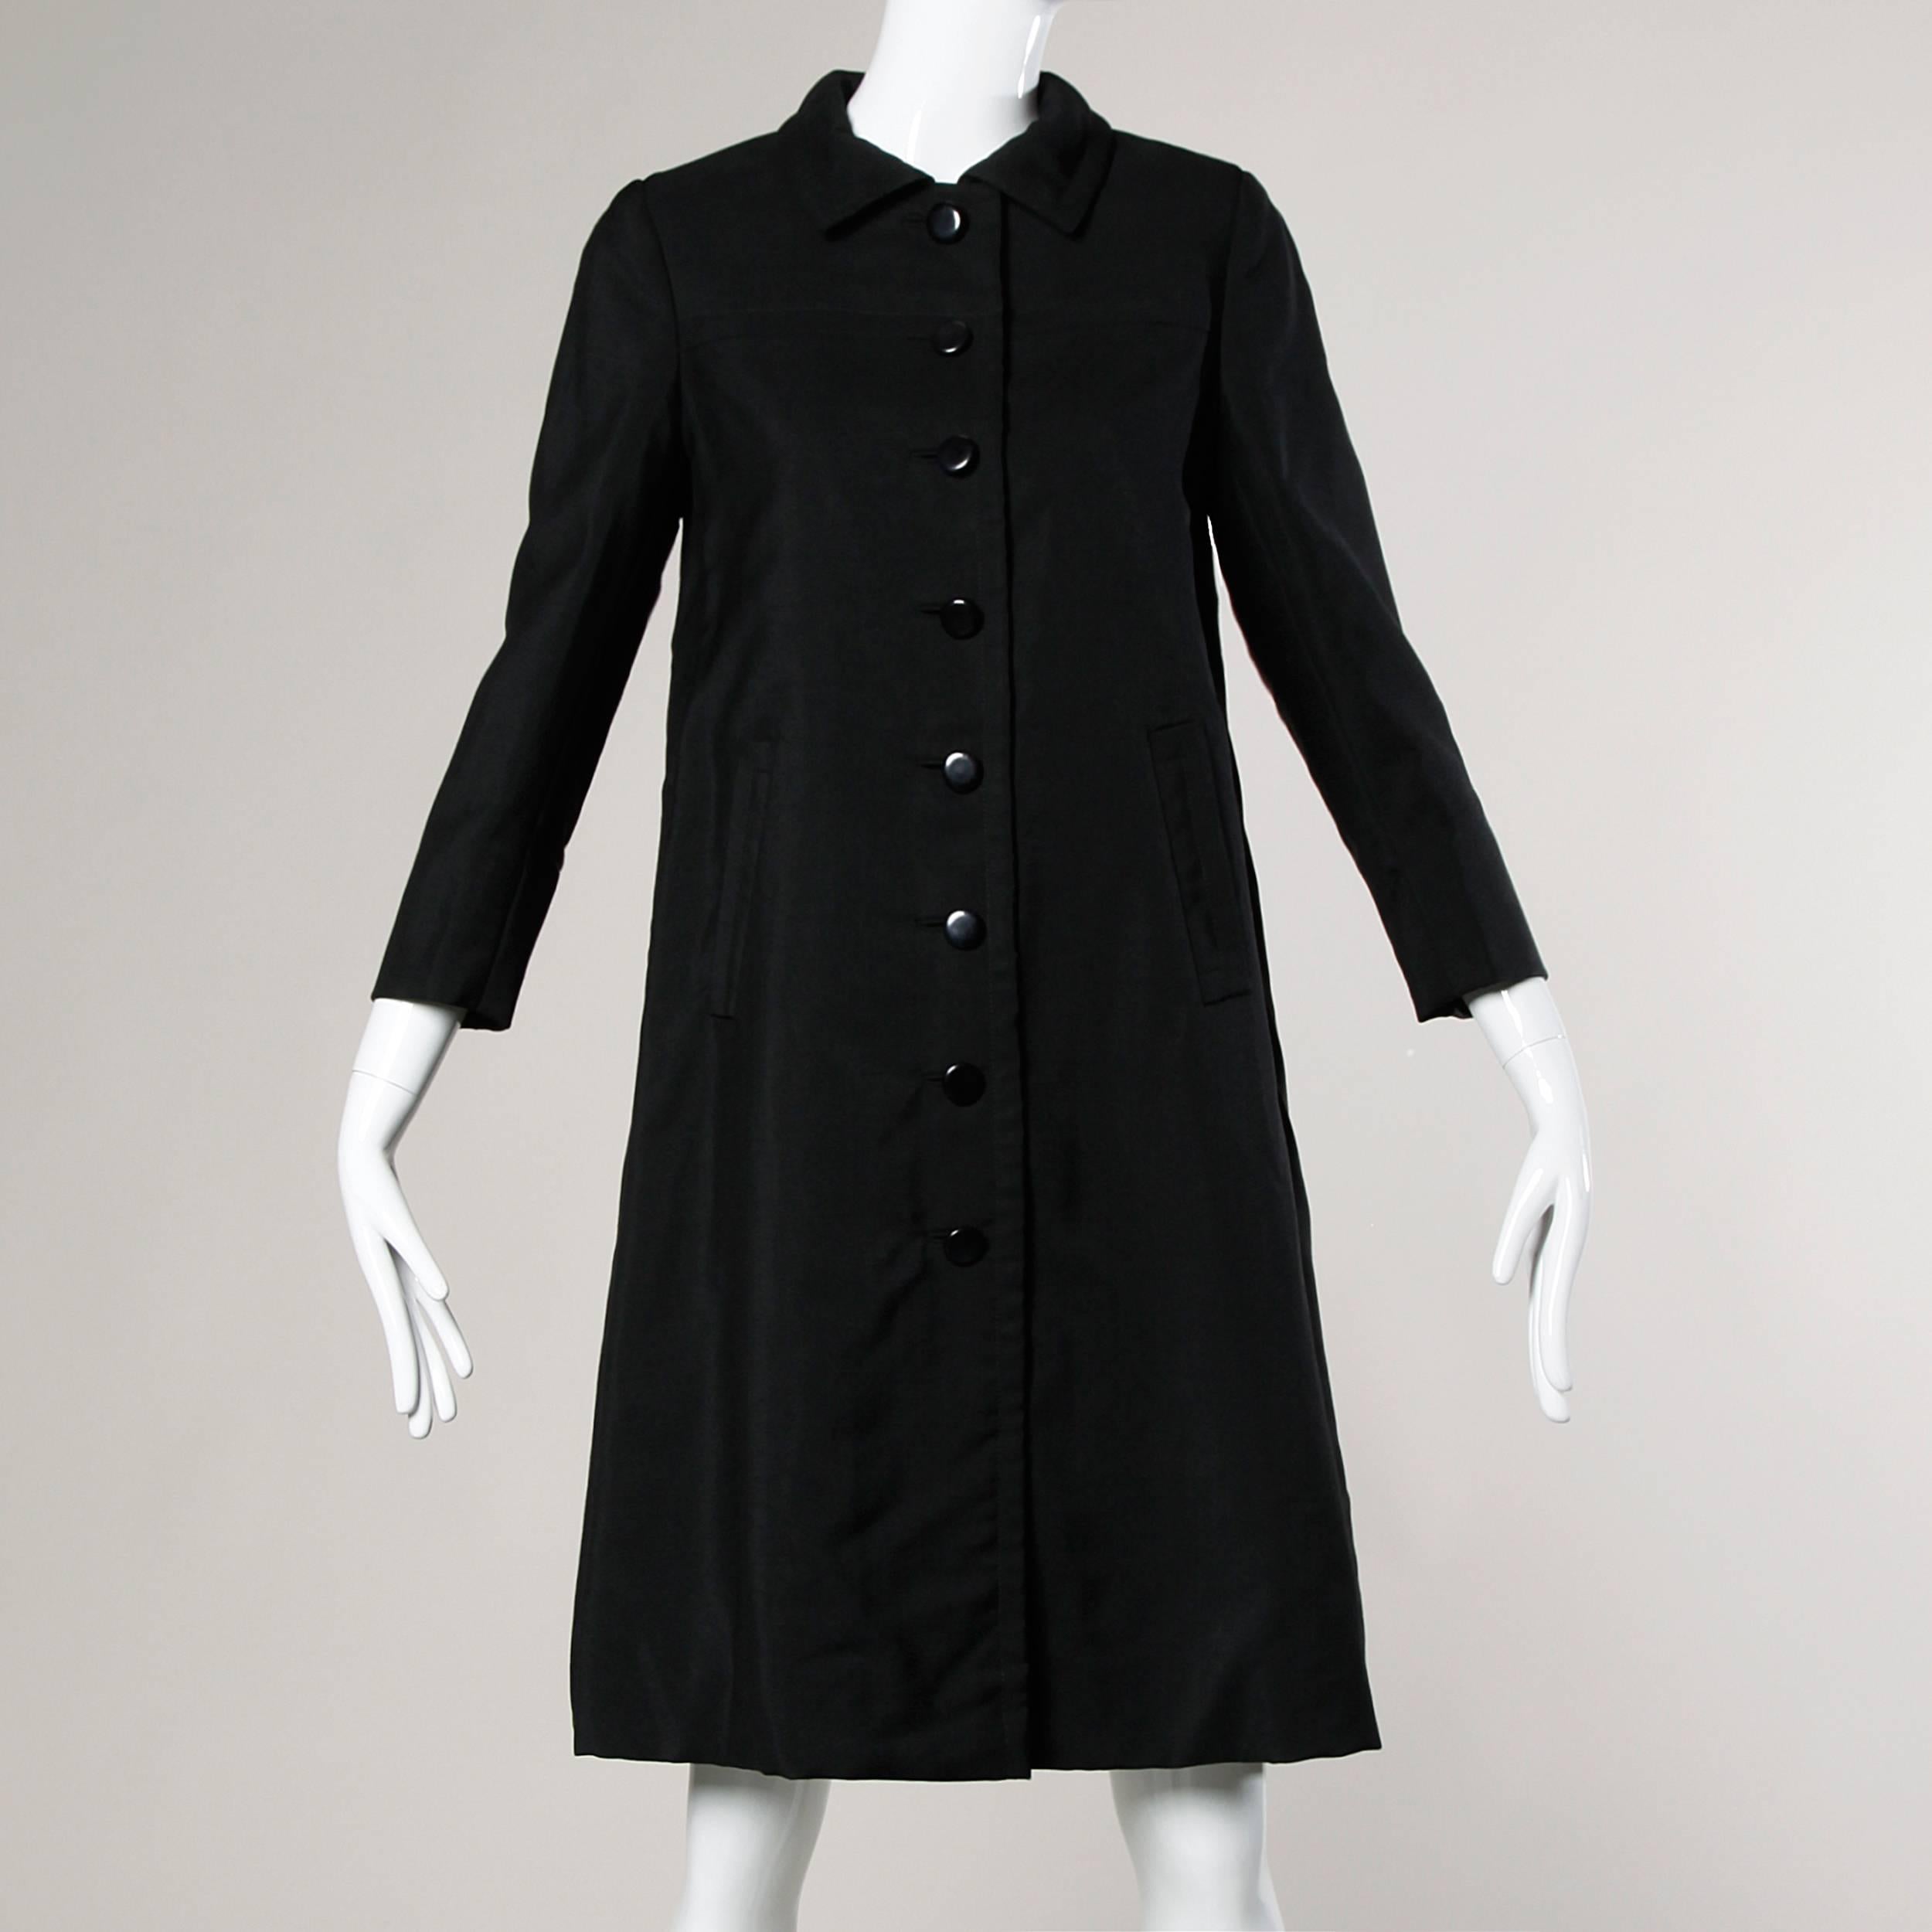 Stunning couture construction! Vintage 1960s Ben Zuckerman for I. Magnin wool and silk swing coat with pristine tailoring and bound button holes. Simple and chic.

Details:

Fully Lined
Shoulder Pads Are Sewn Into Lining
Front Button and Snap